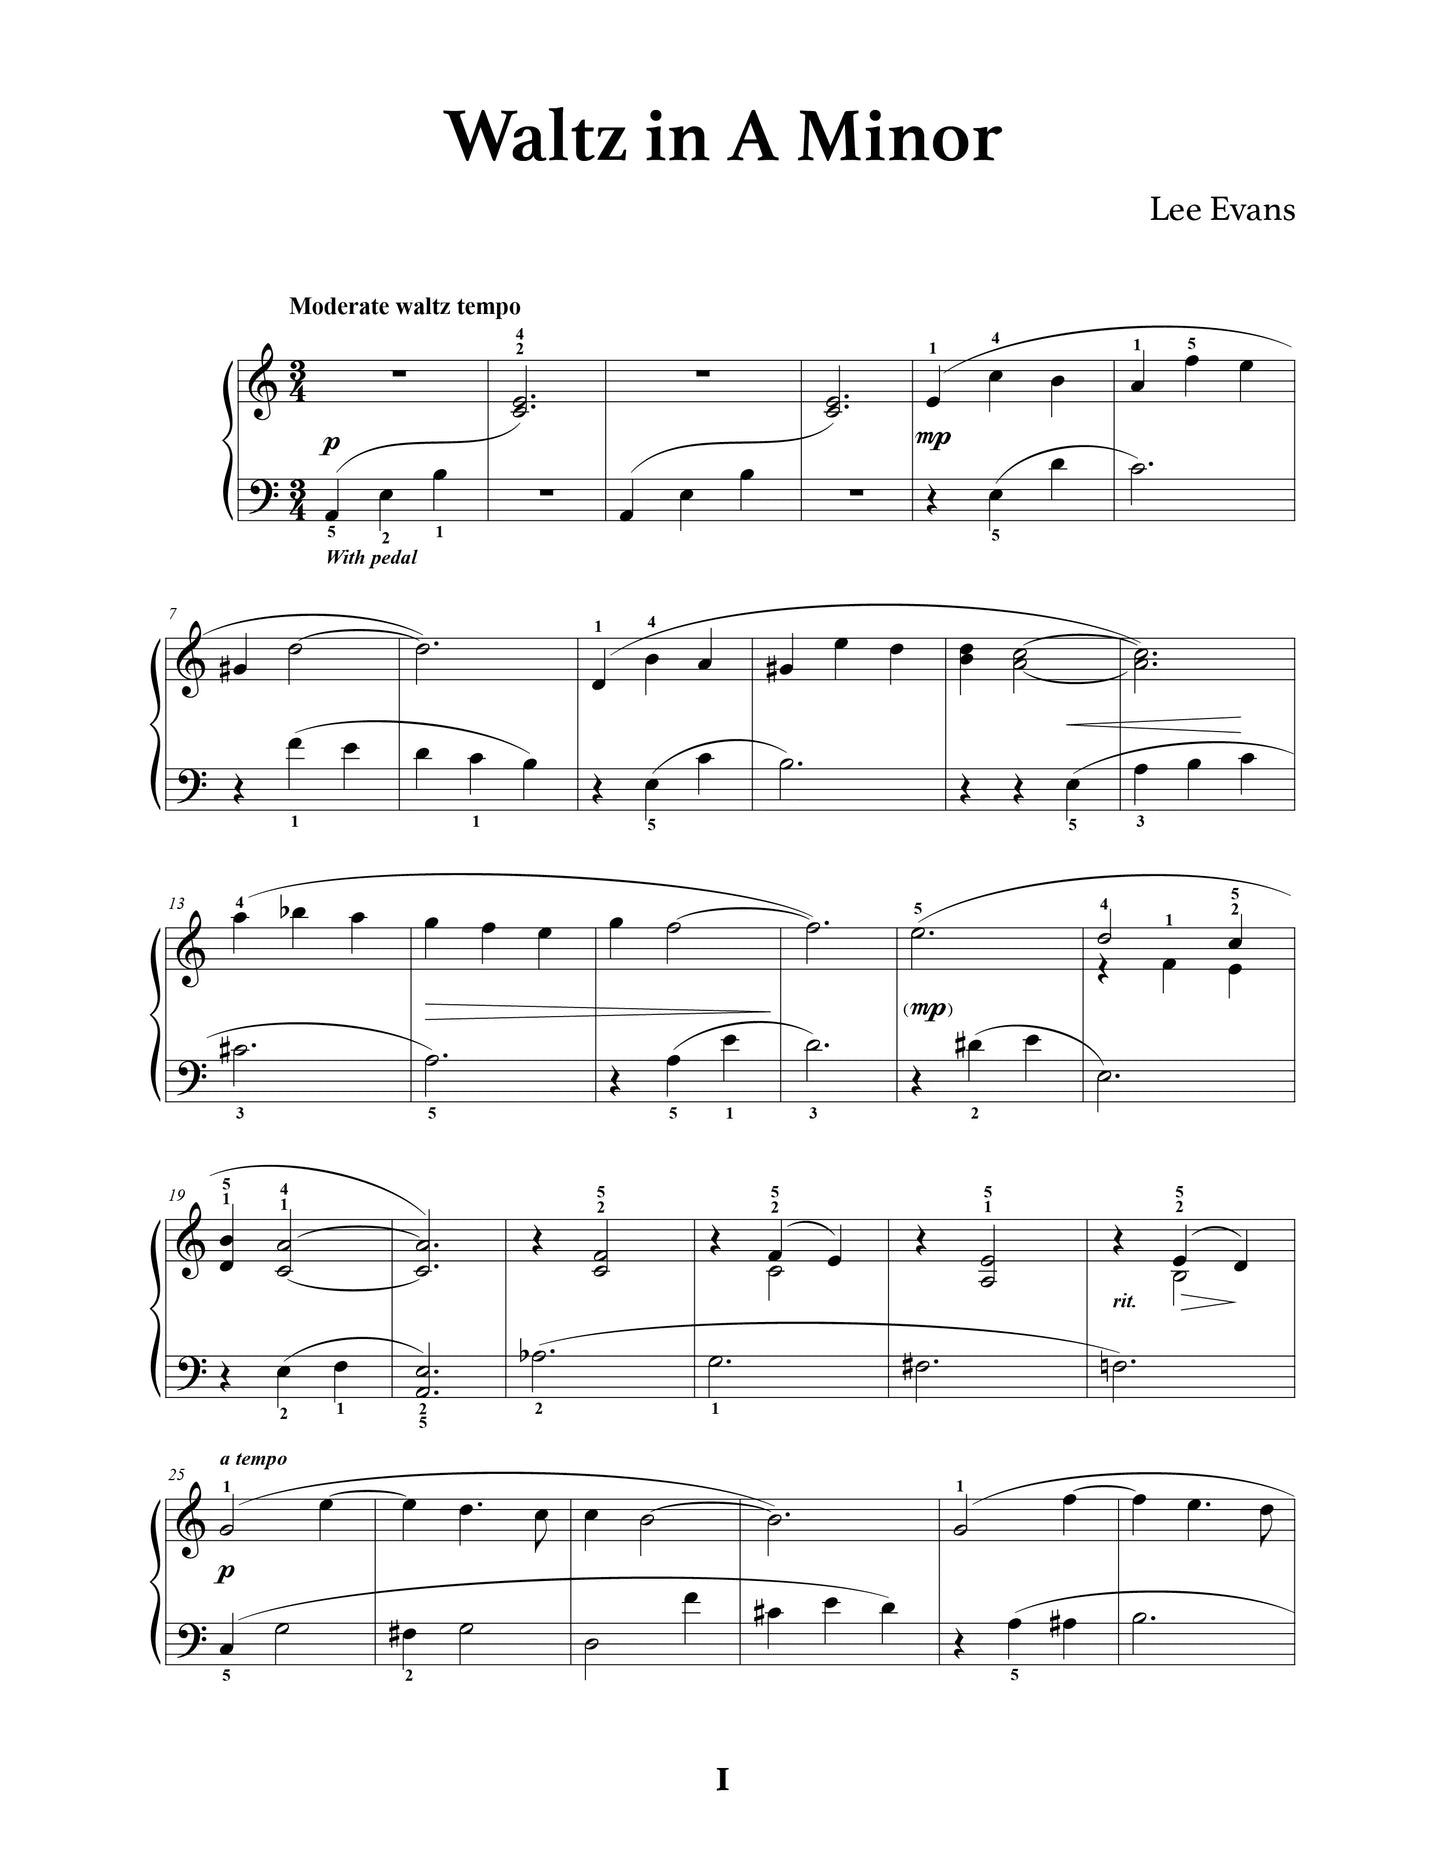 Two Waltzes for Piano Solo by Lee Evans